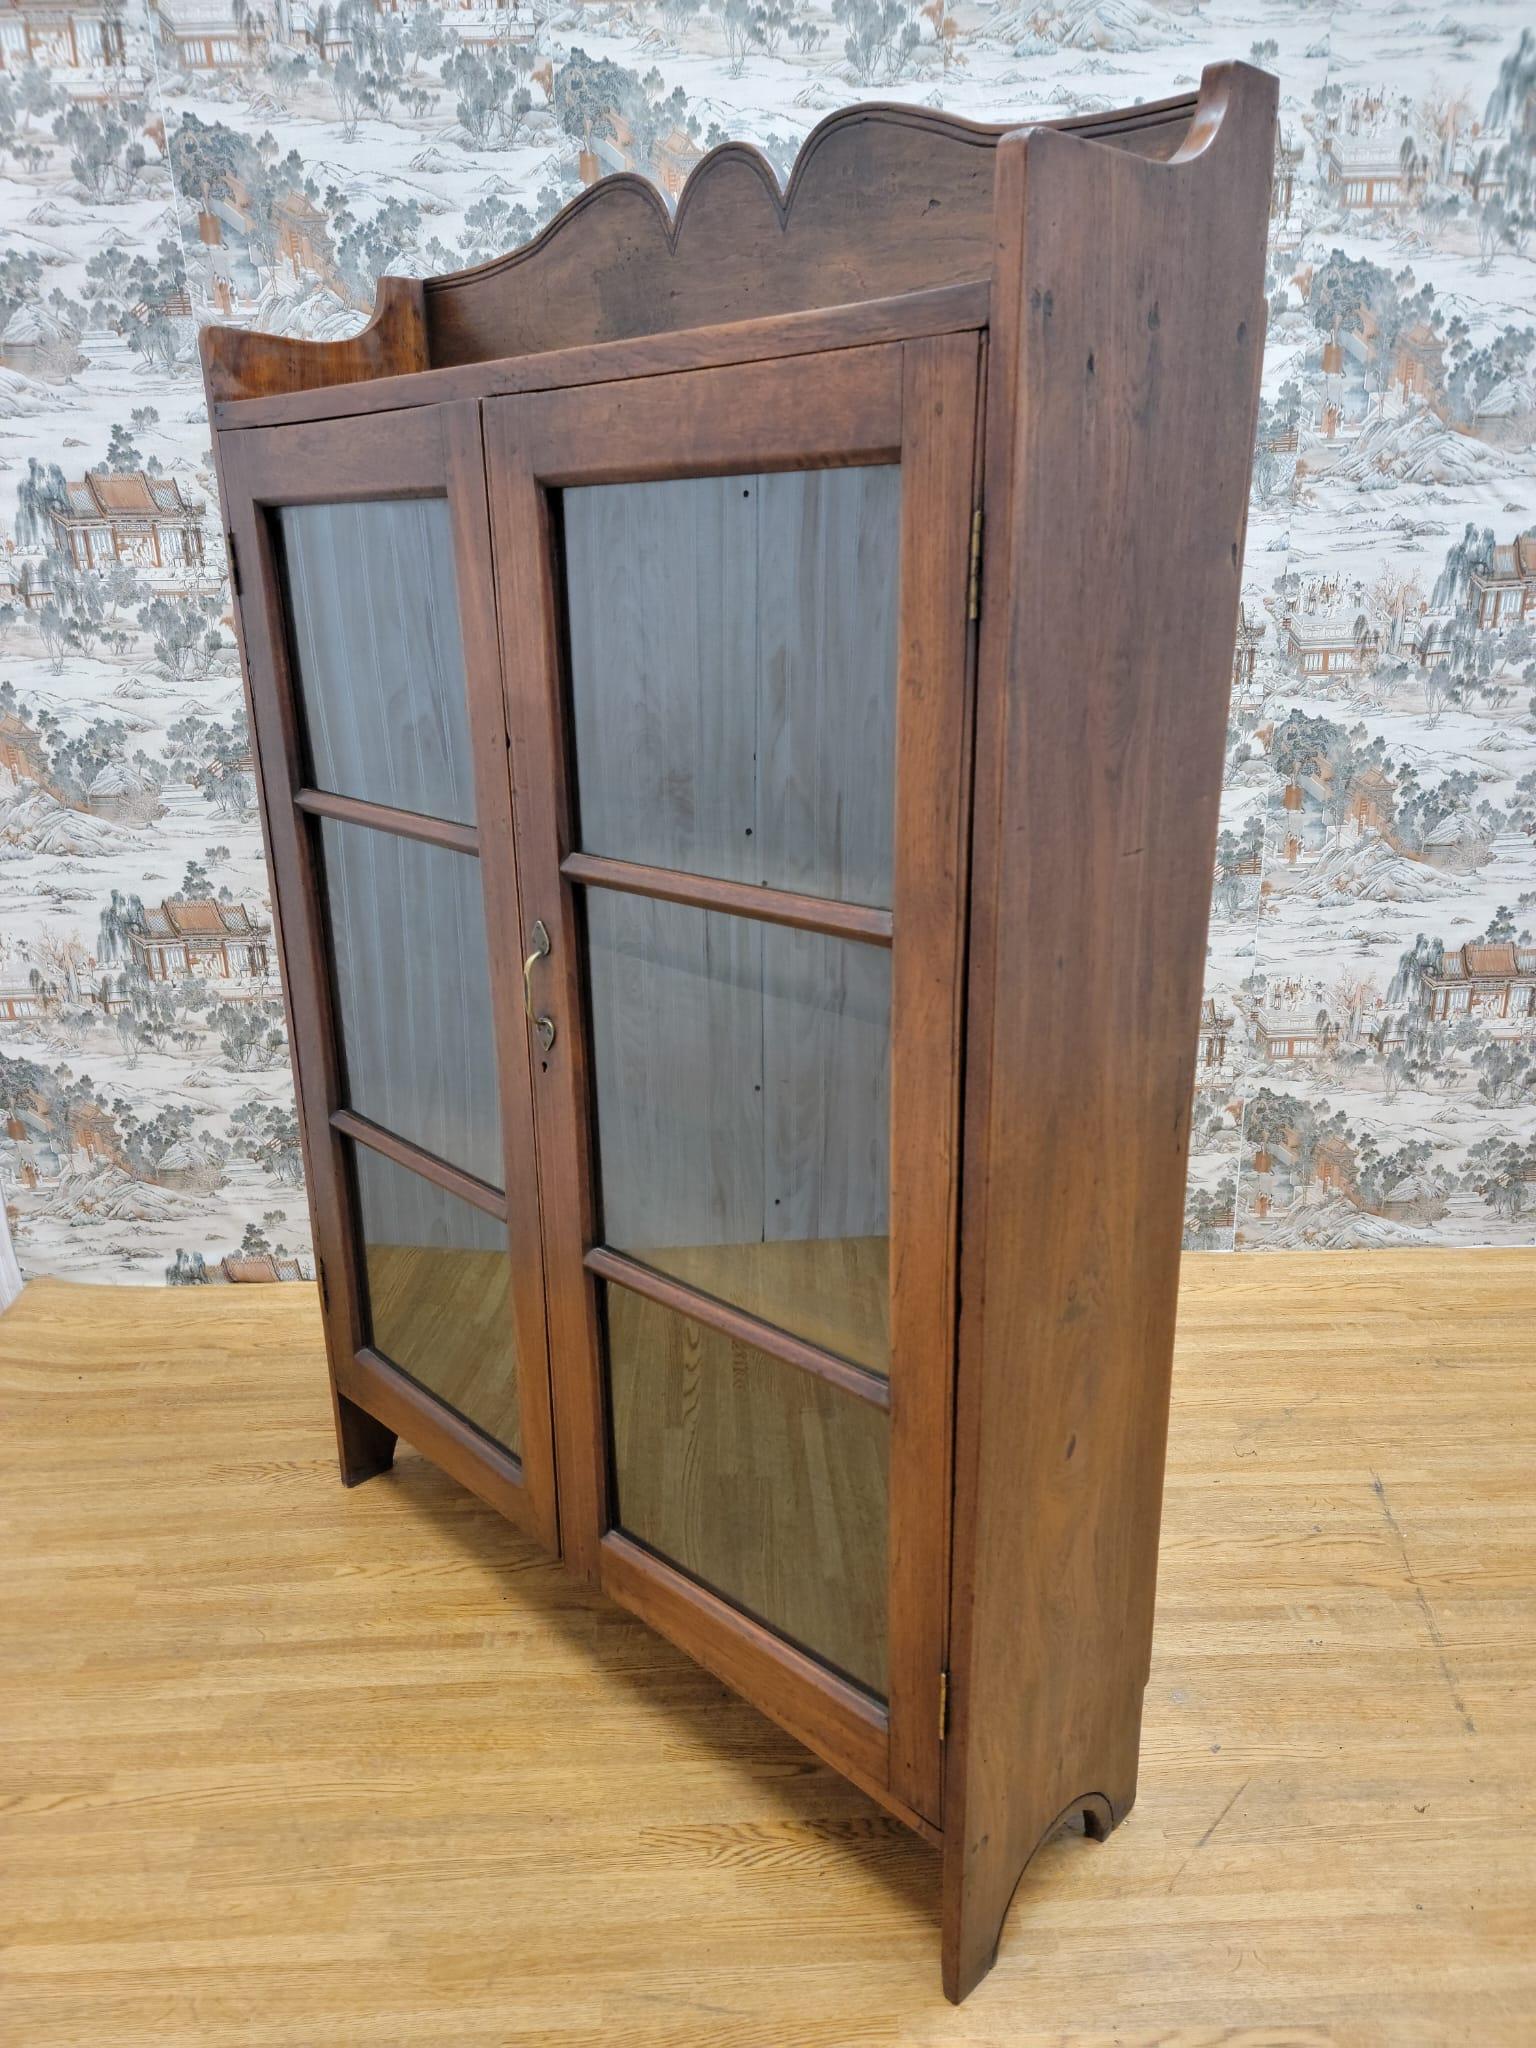 Vintage Thai British Colonial Teak and Glass Display Cabinet

The cabinet has 2 Doors and 3 Shelves. This cabinet was made in Thailand.

Circa 1988

Dimensions:

W 41.5”
D 12”
H 62”